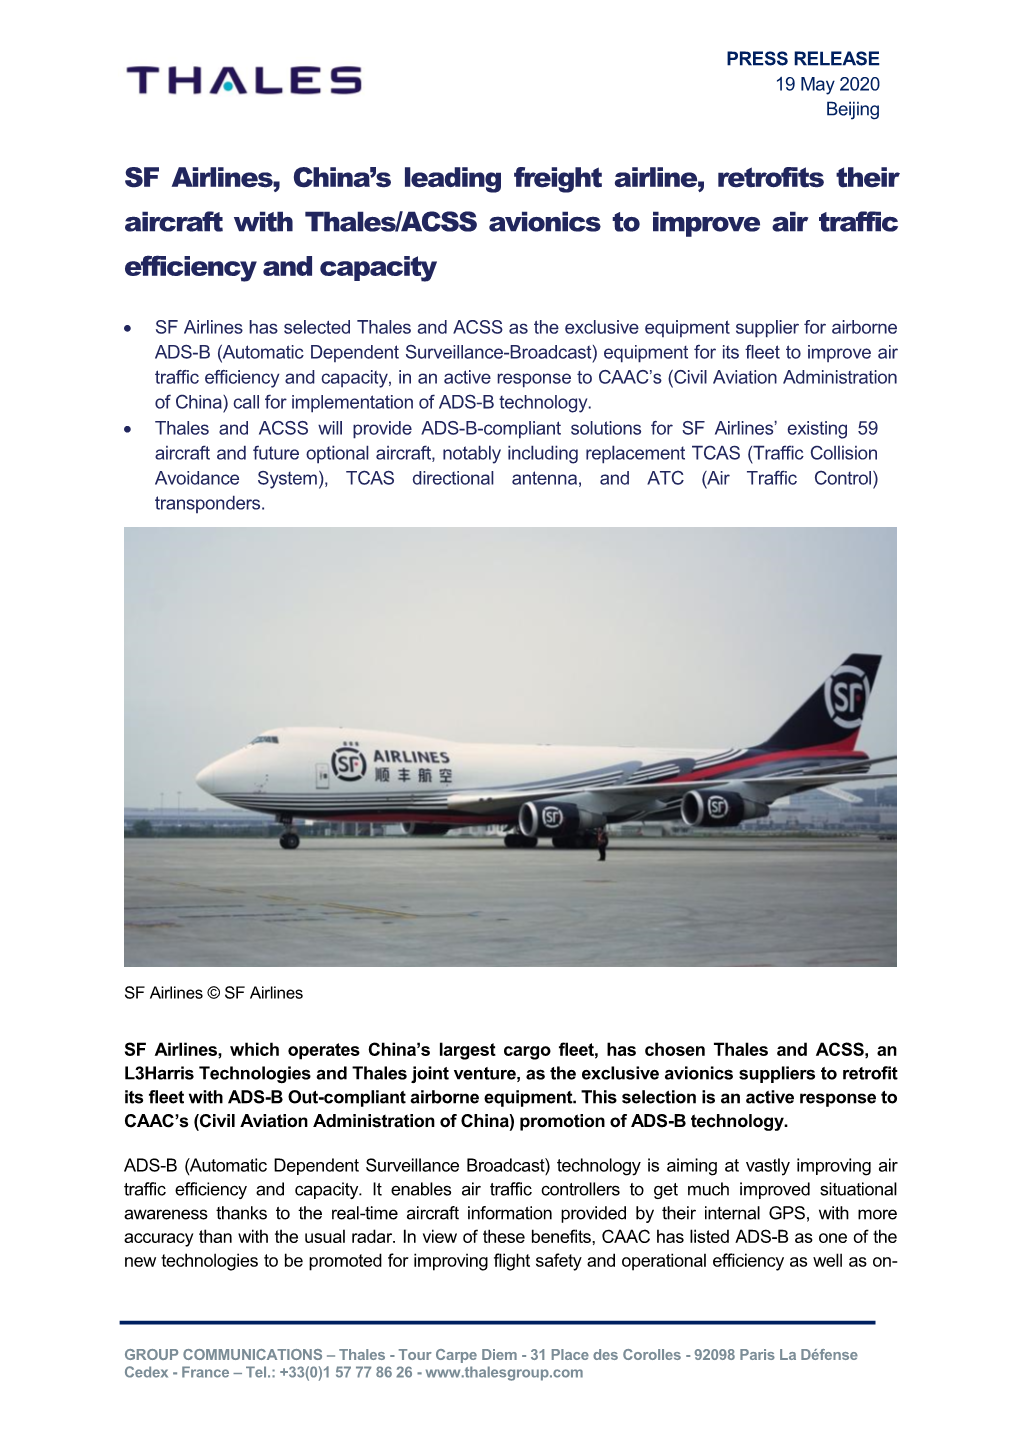 SF Airlines, China's Leading Freight Airline, Retrofits Their Aircraft With